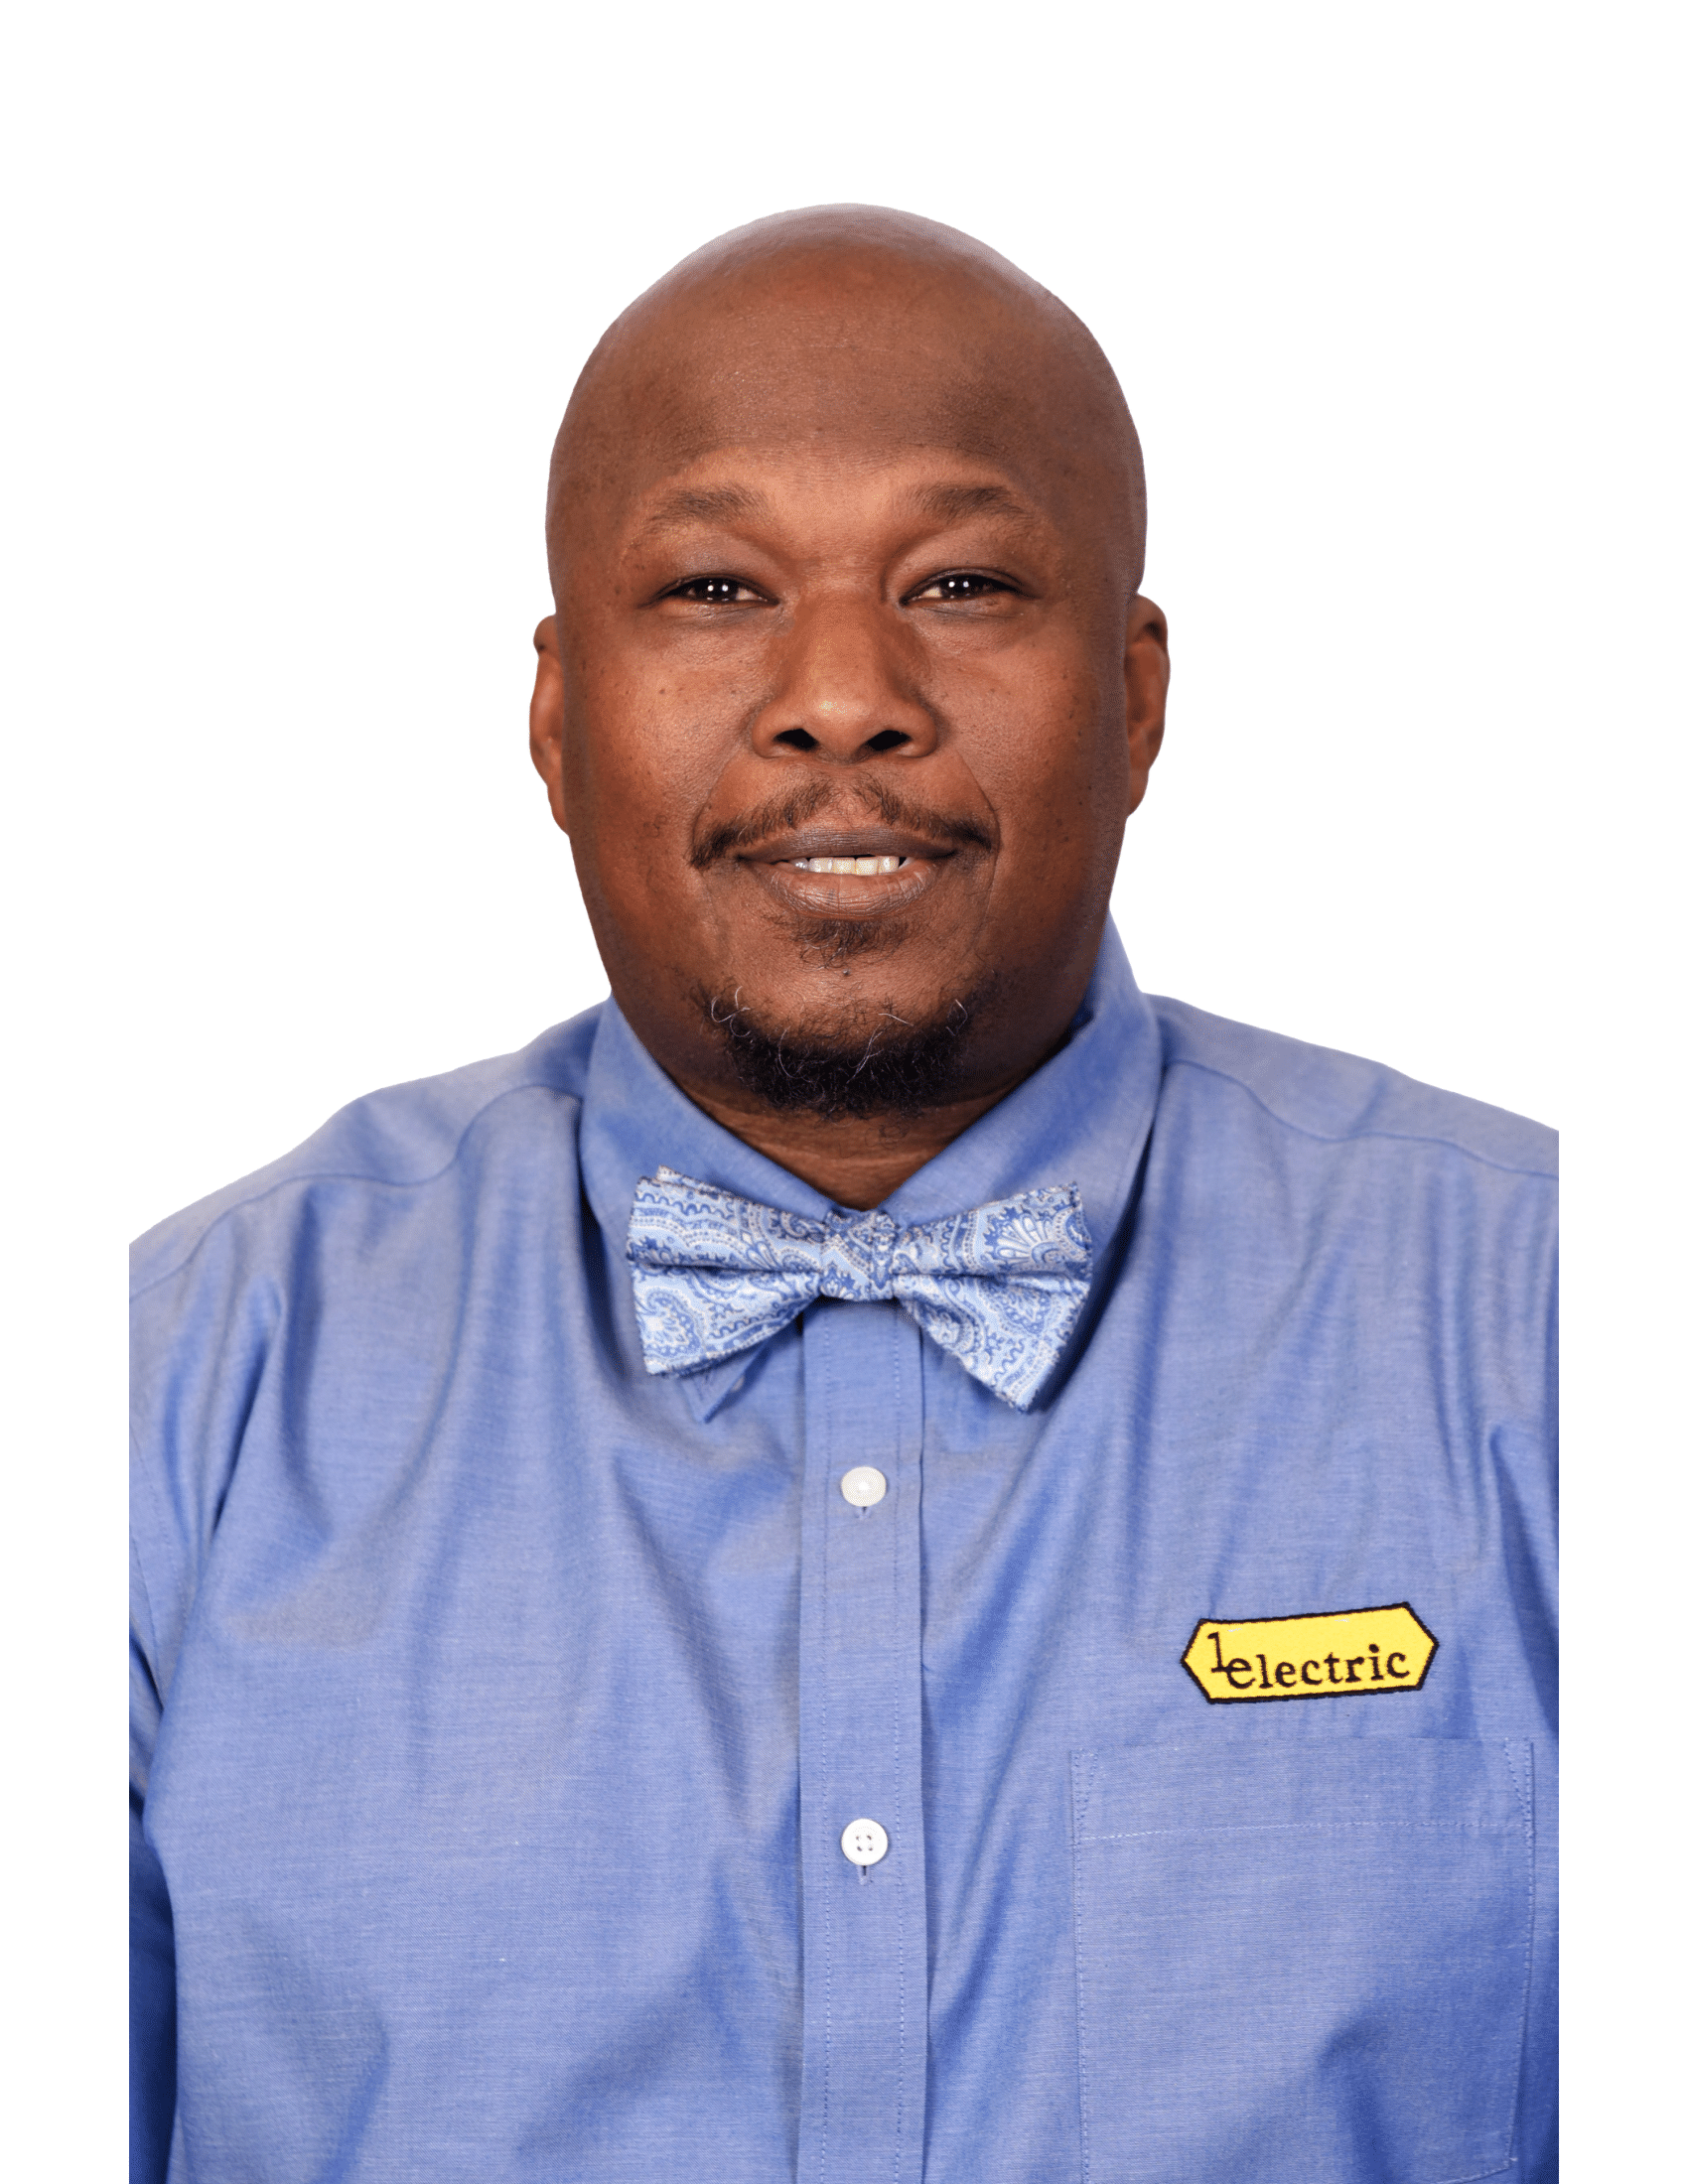 Bryant Clark, Service Manager